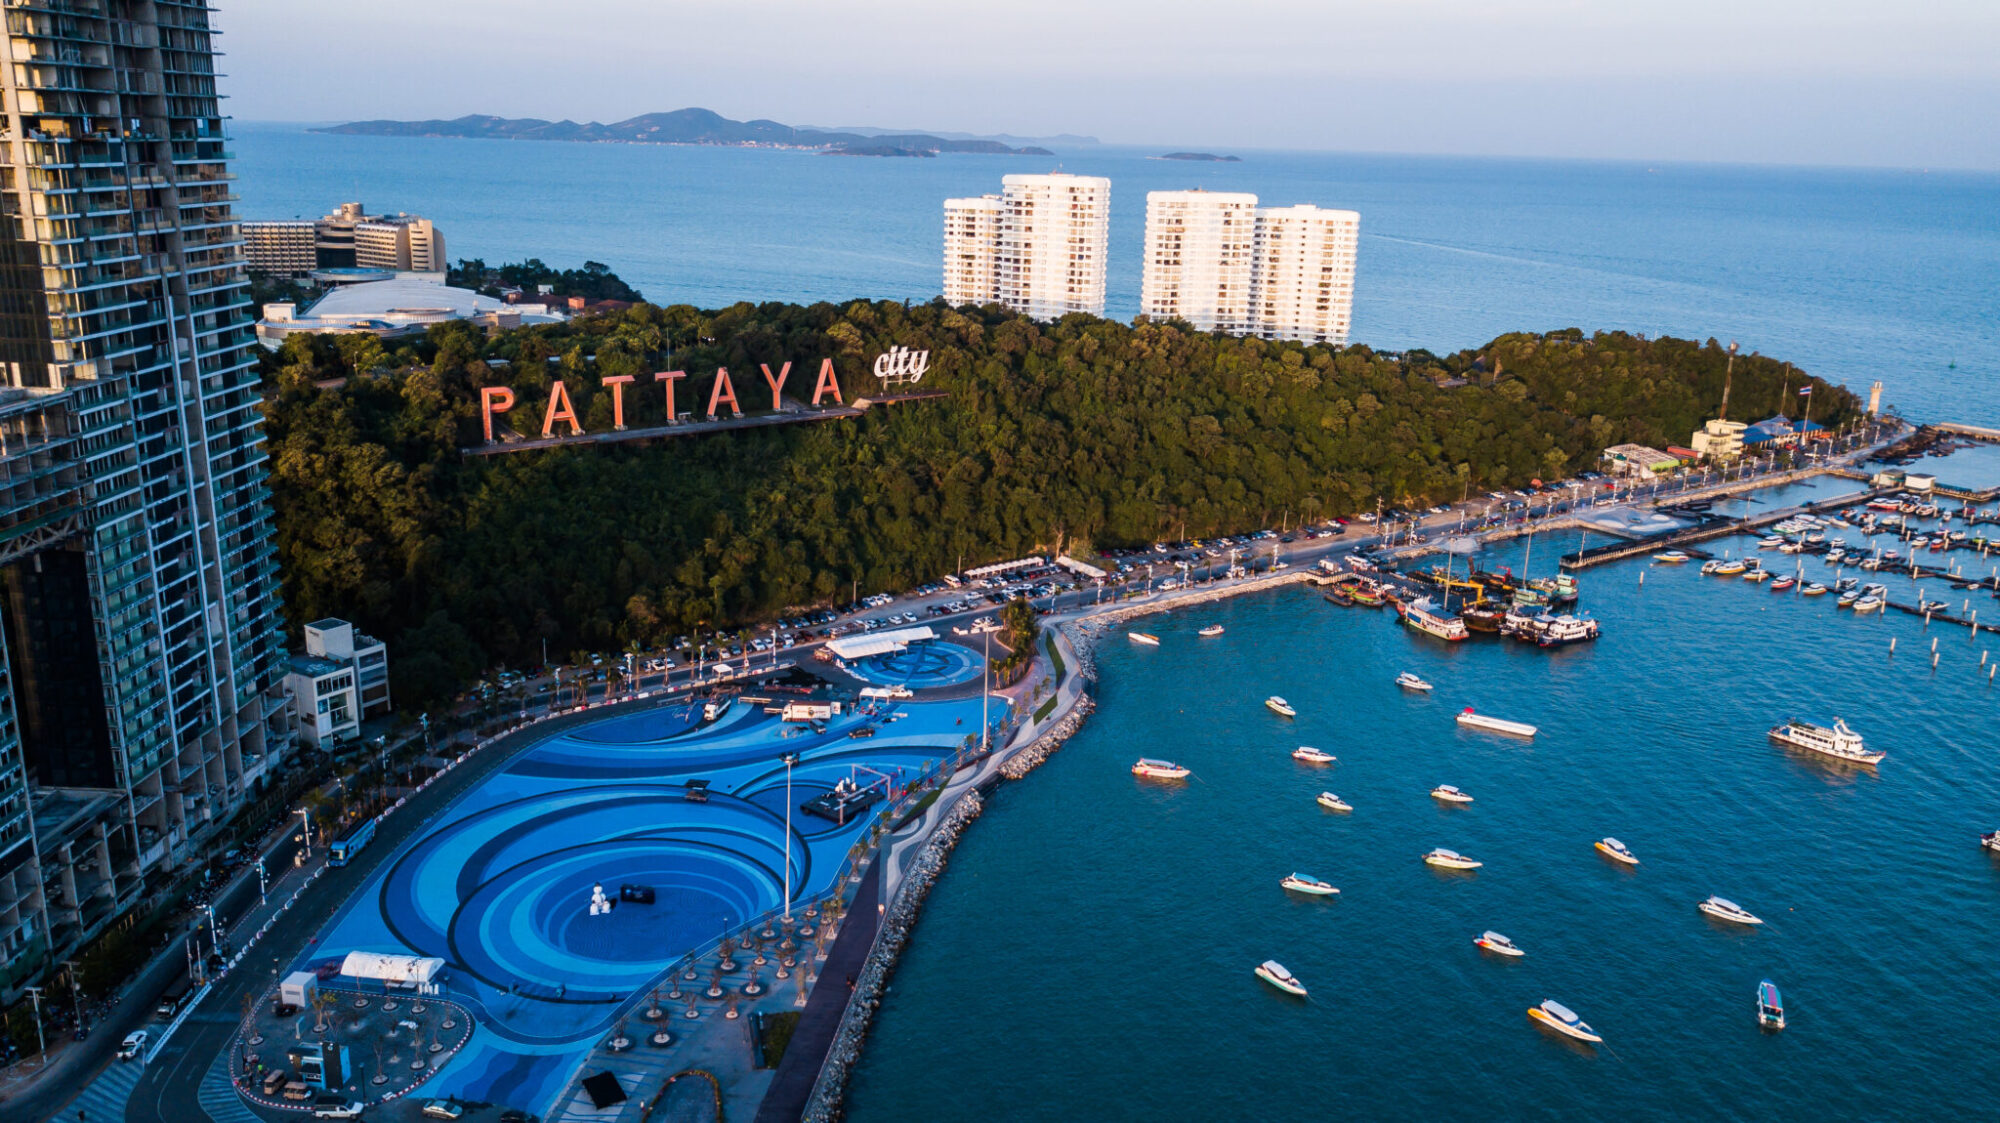 Changes of Real Estate in Pattaya